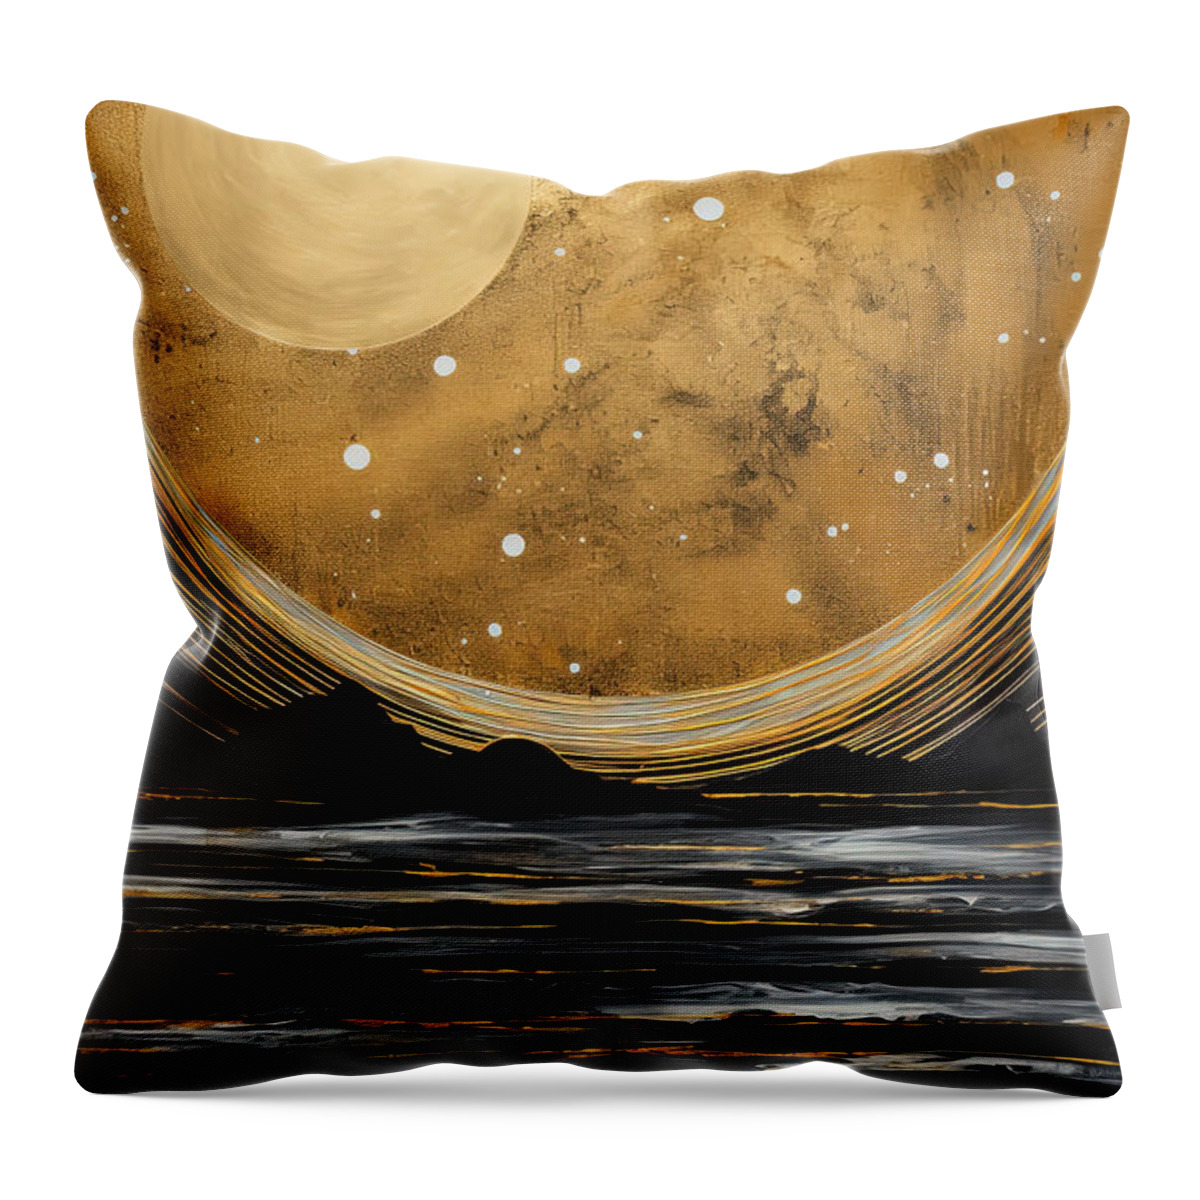 Black And Gold Seascape With Huge Golden Moon Throw Pillow featuring the painting Modern Moonlit Seascape Art by Lourry Legarde